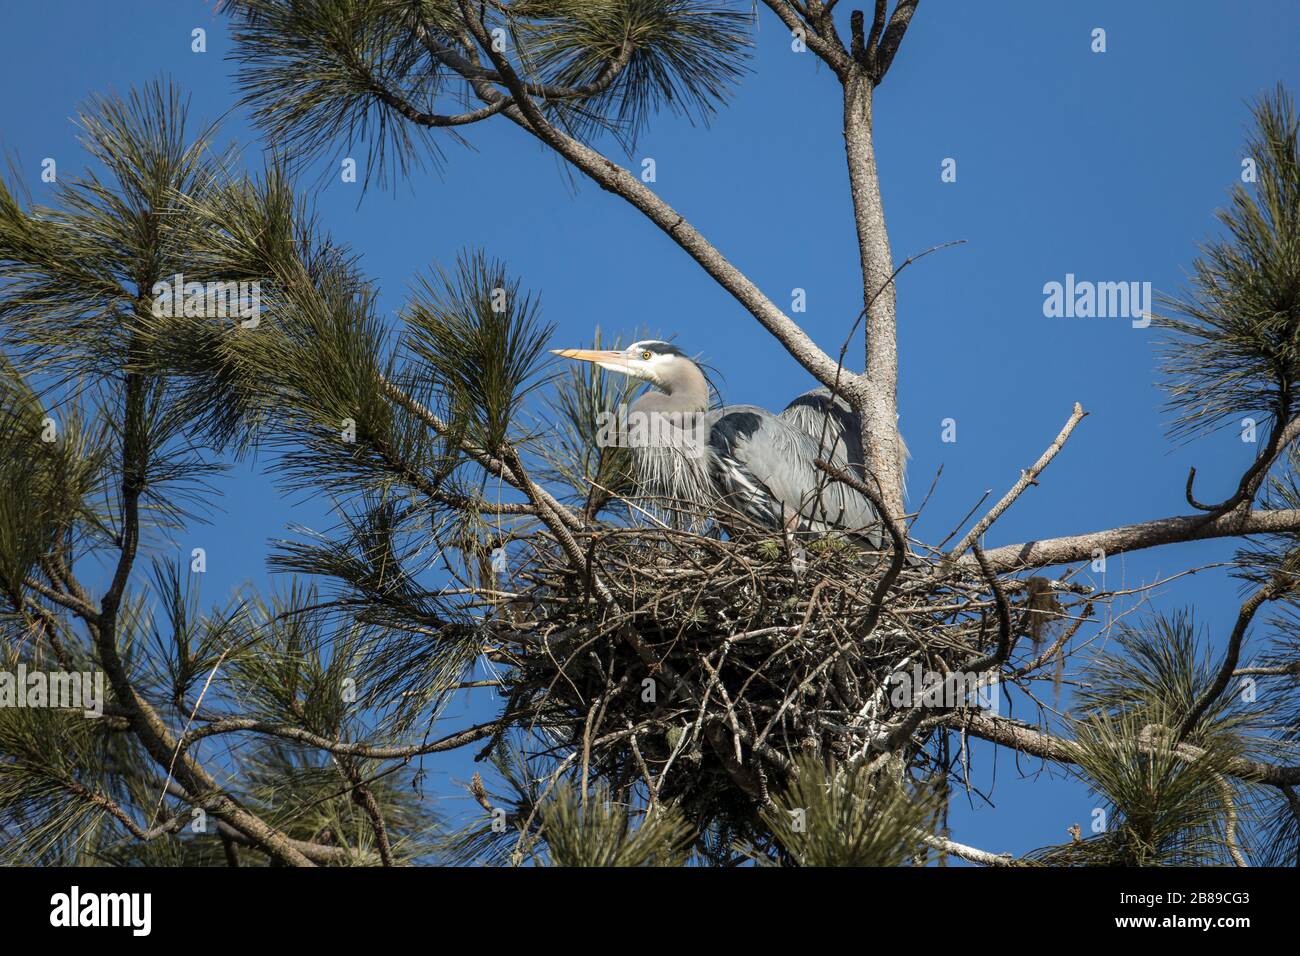 Great blue herons in a nest at a rookery near Coeur d'Alene, Idaho. Stock Photo